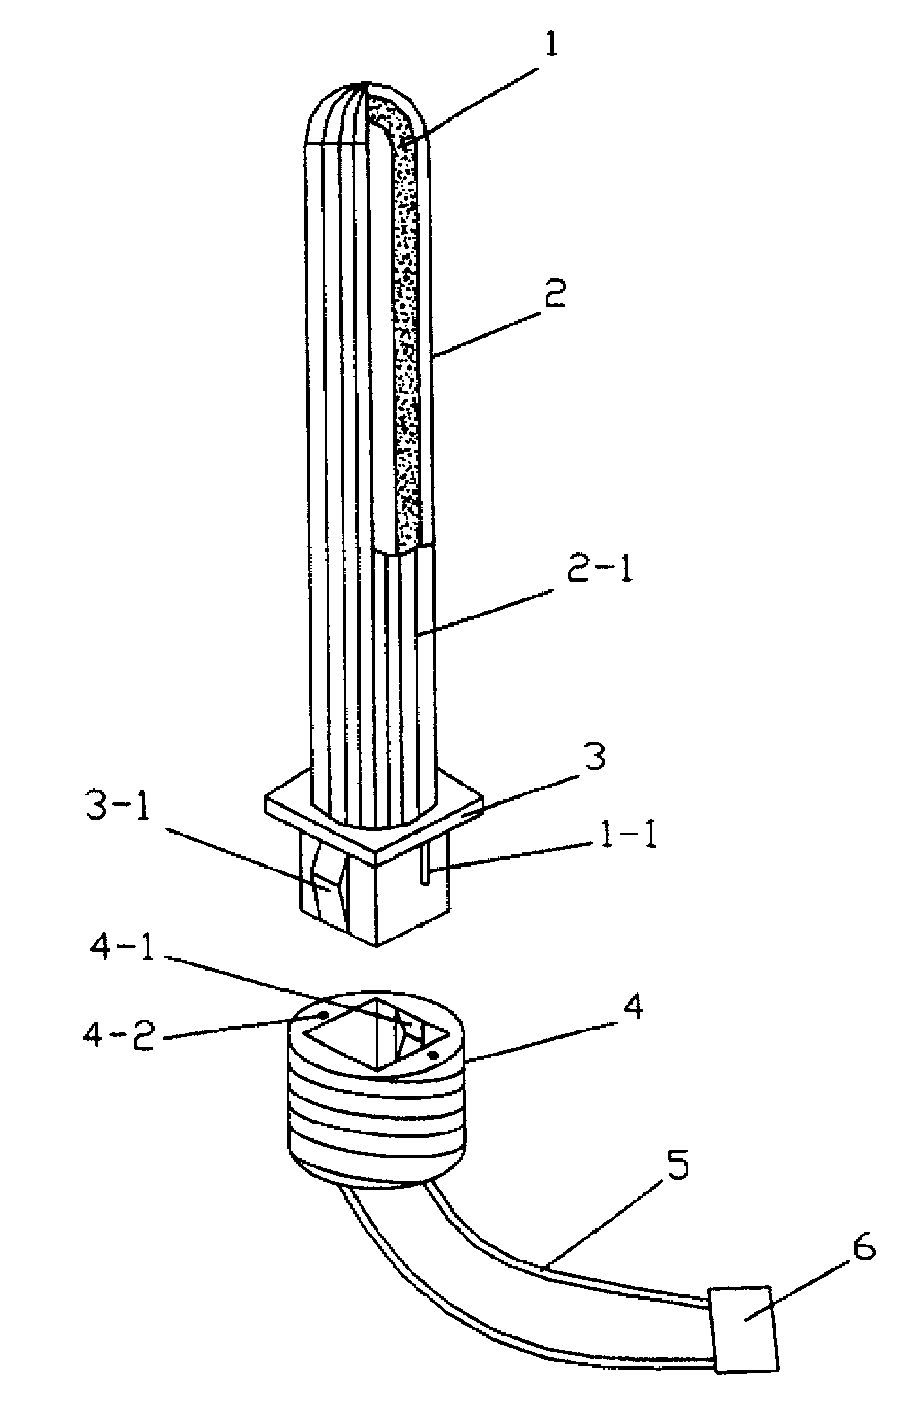 Cold cathode light-source and use thereof